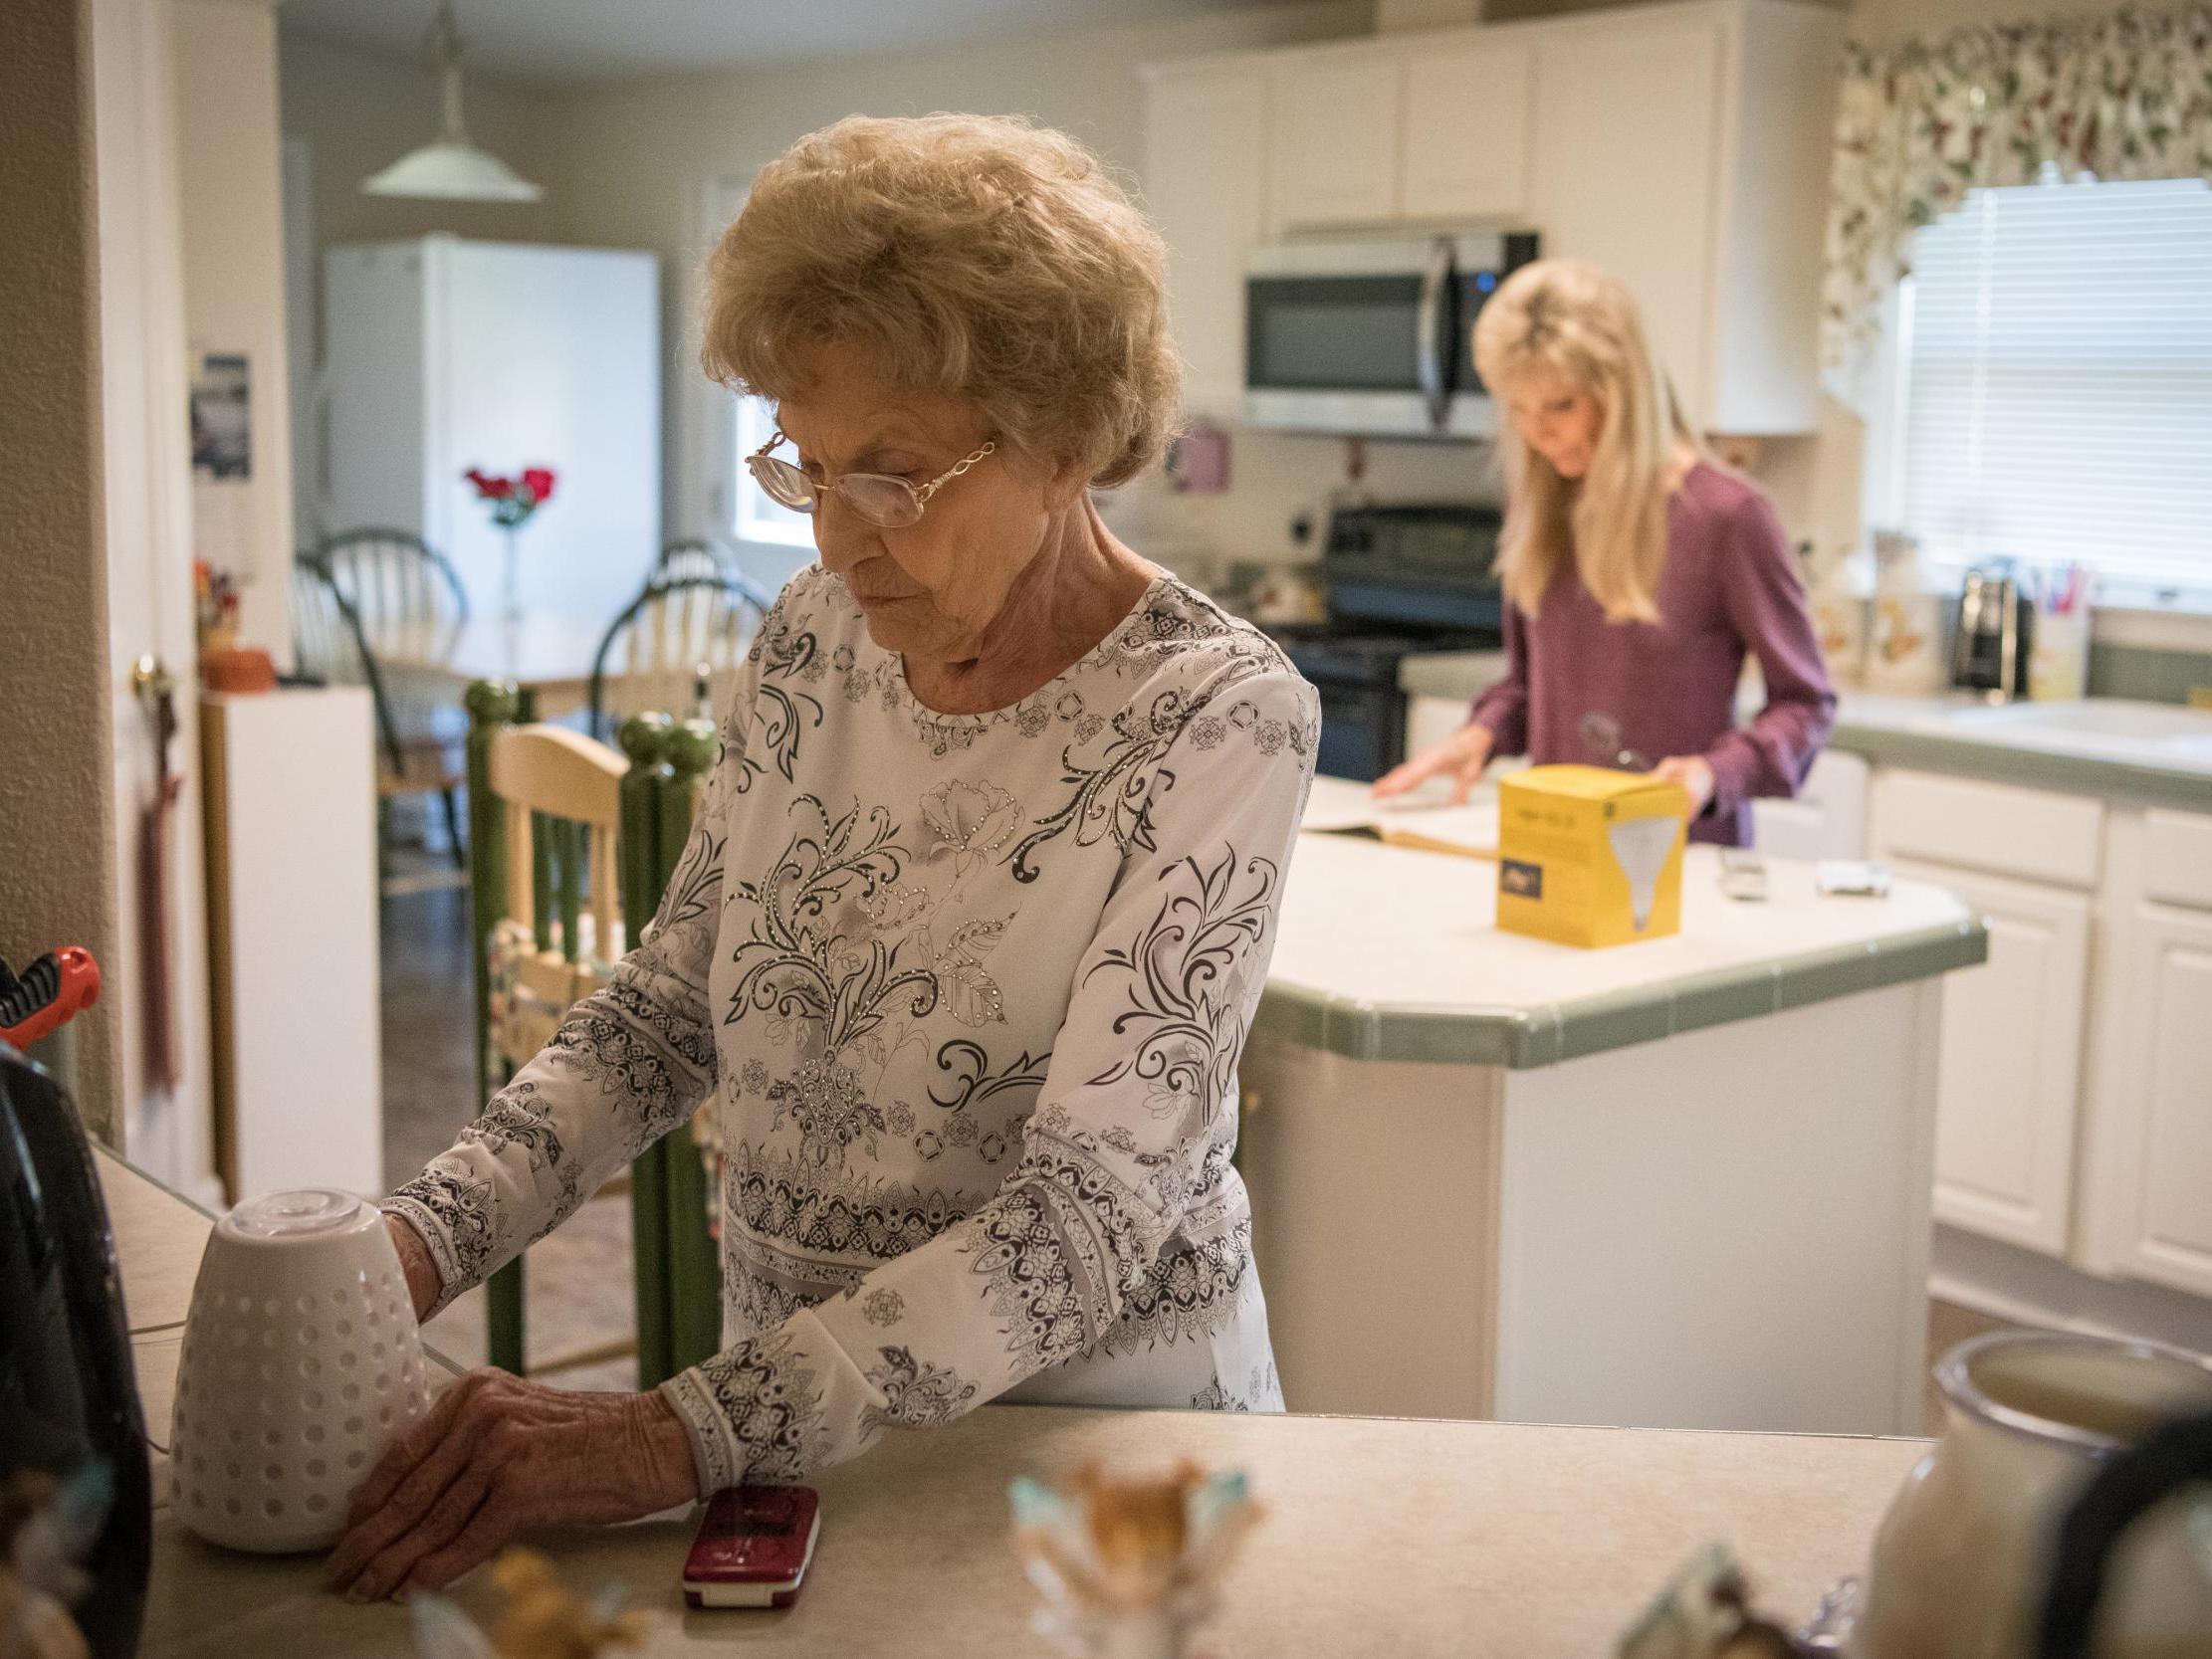 O’Connell organises her kitchen with her daughter, Elaine Dilley, who says her mother’s pain was so intense ‘you couldn’t touch her’ (Loren Elliott for The Washington Post)